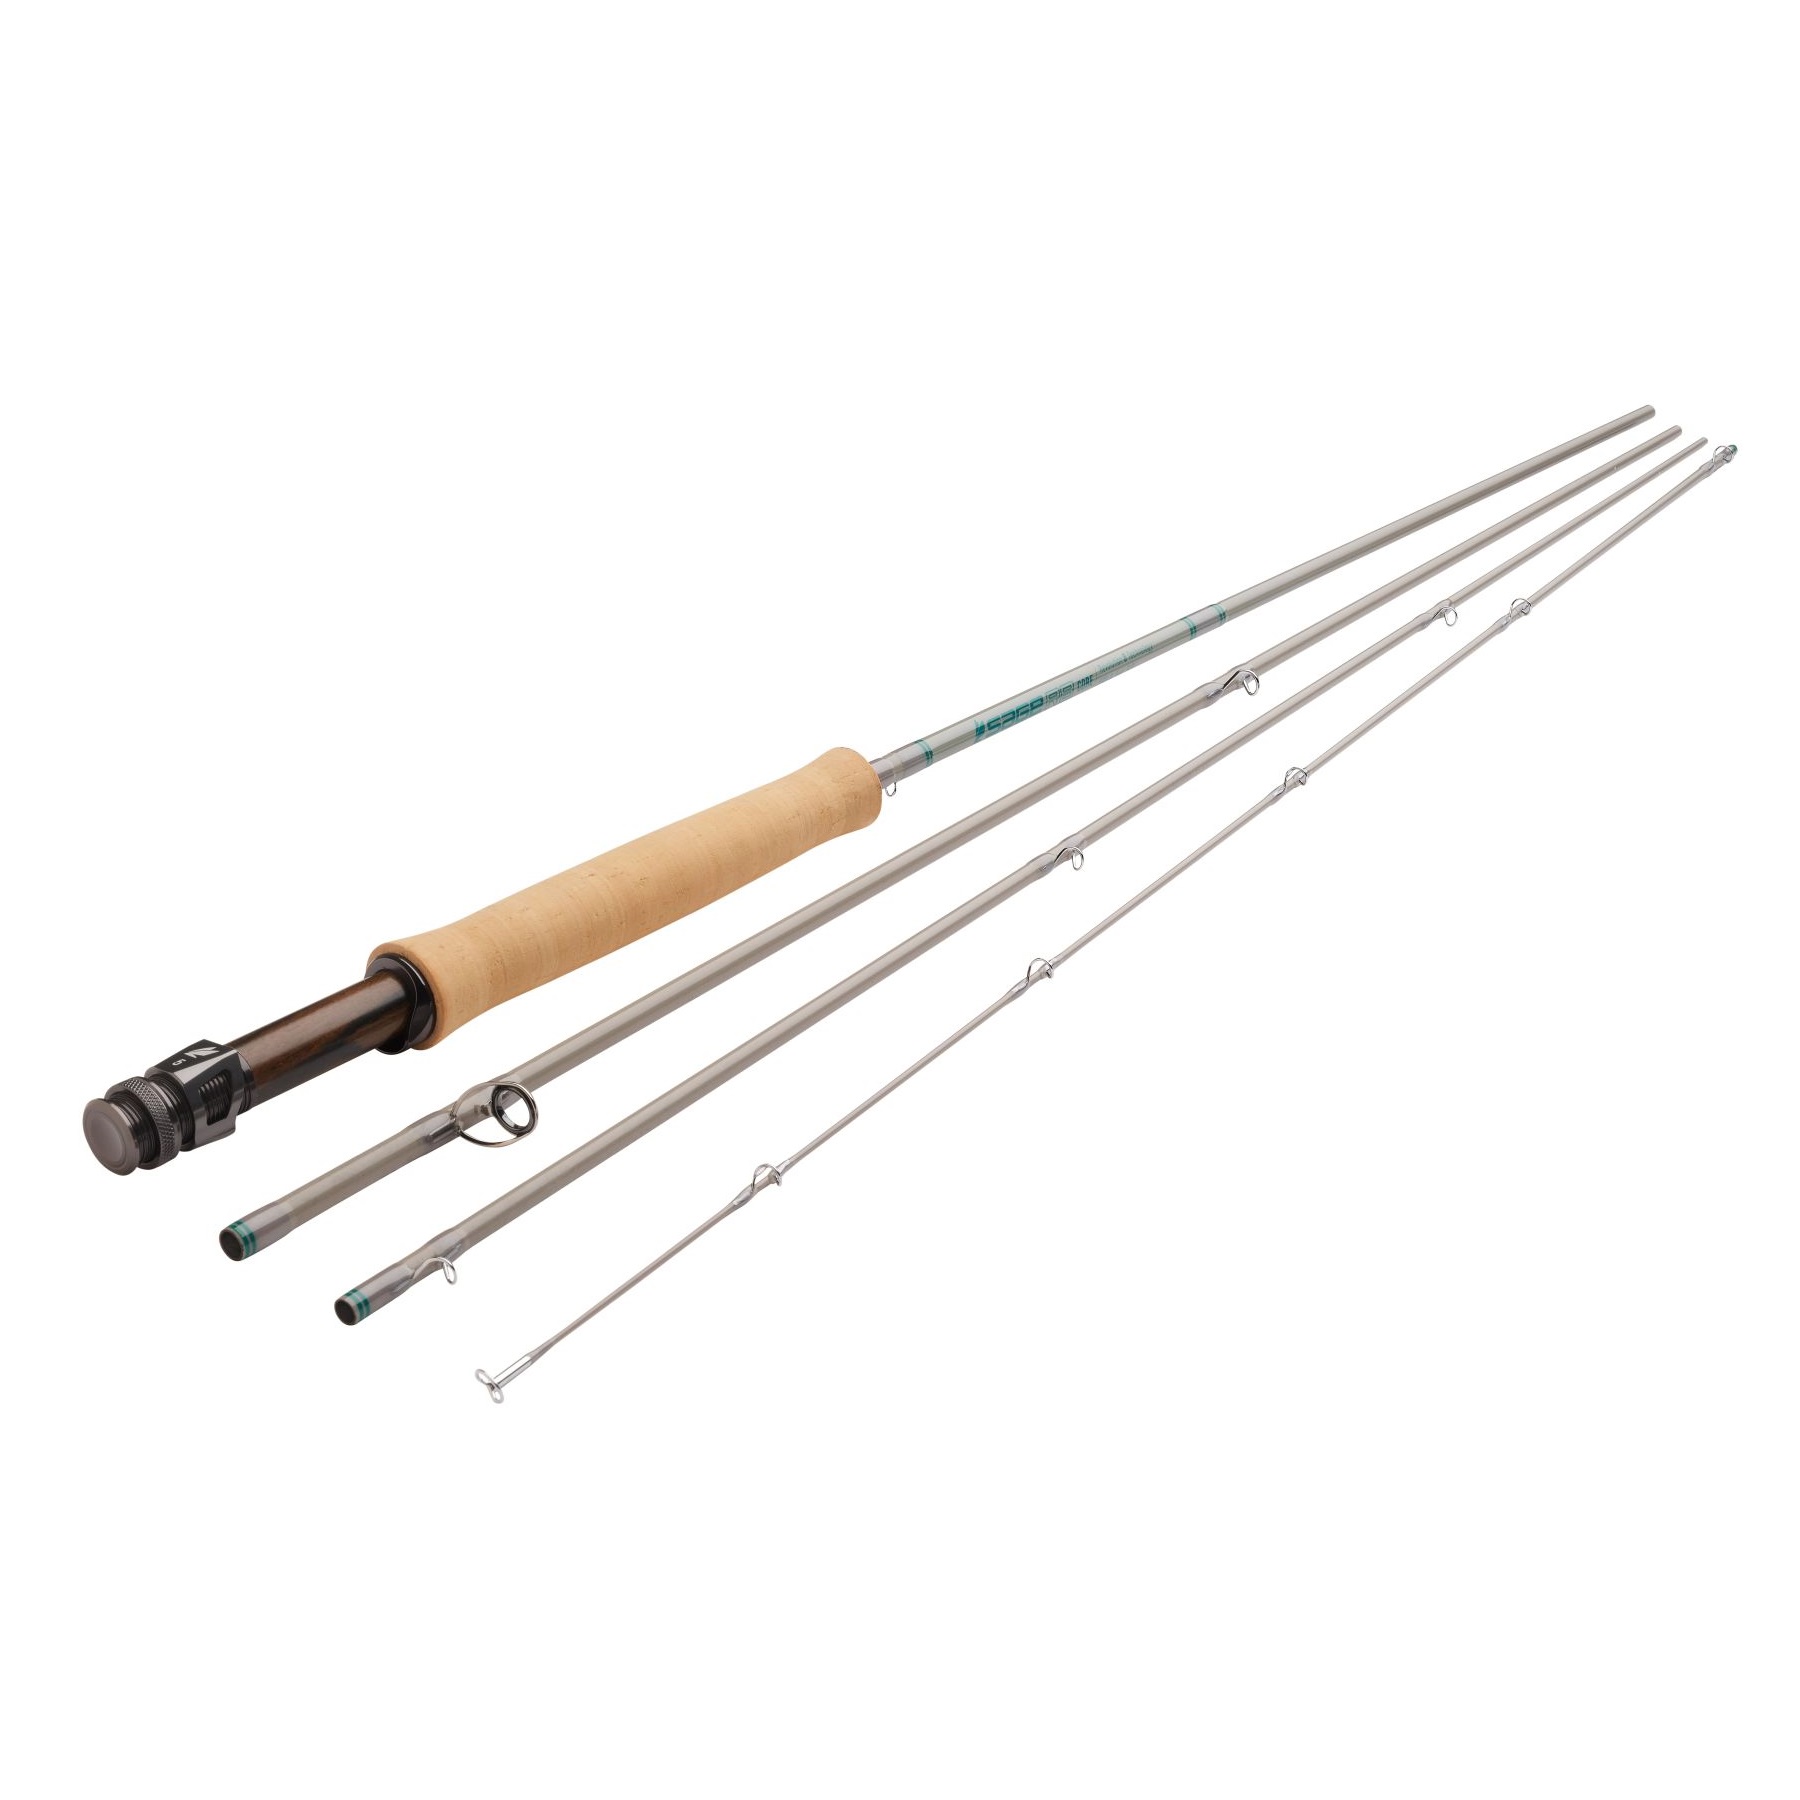 R8 Core Fly Rod Limited Edition (Retro Grey)